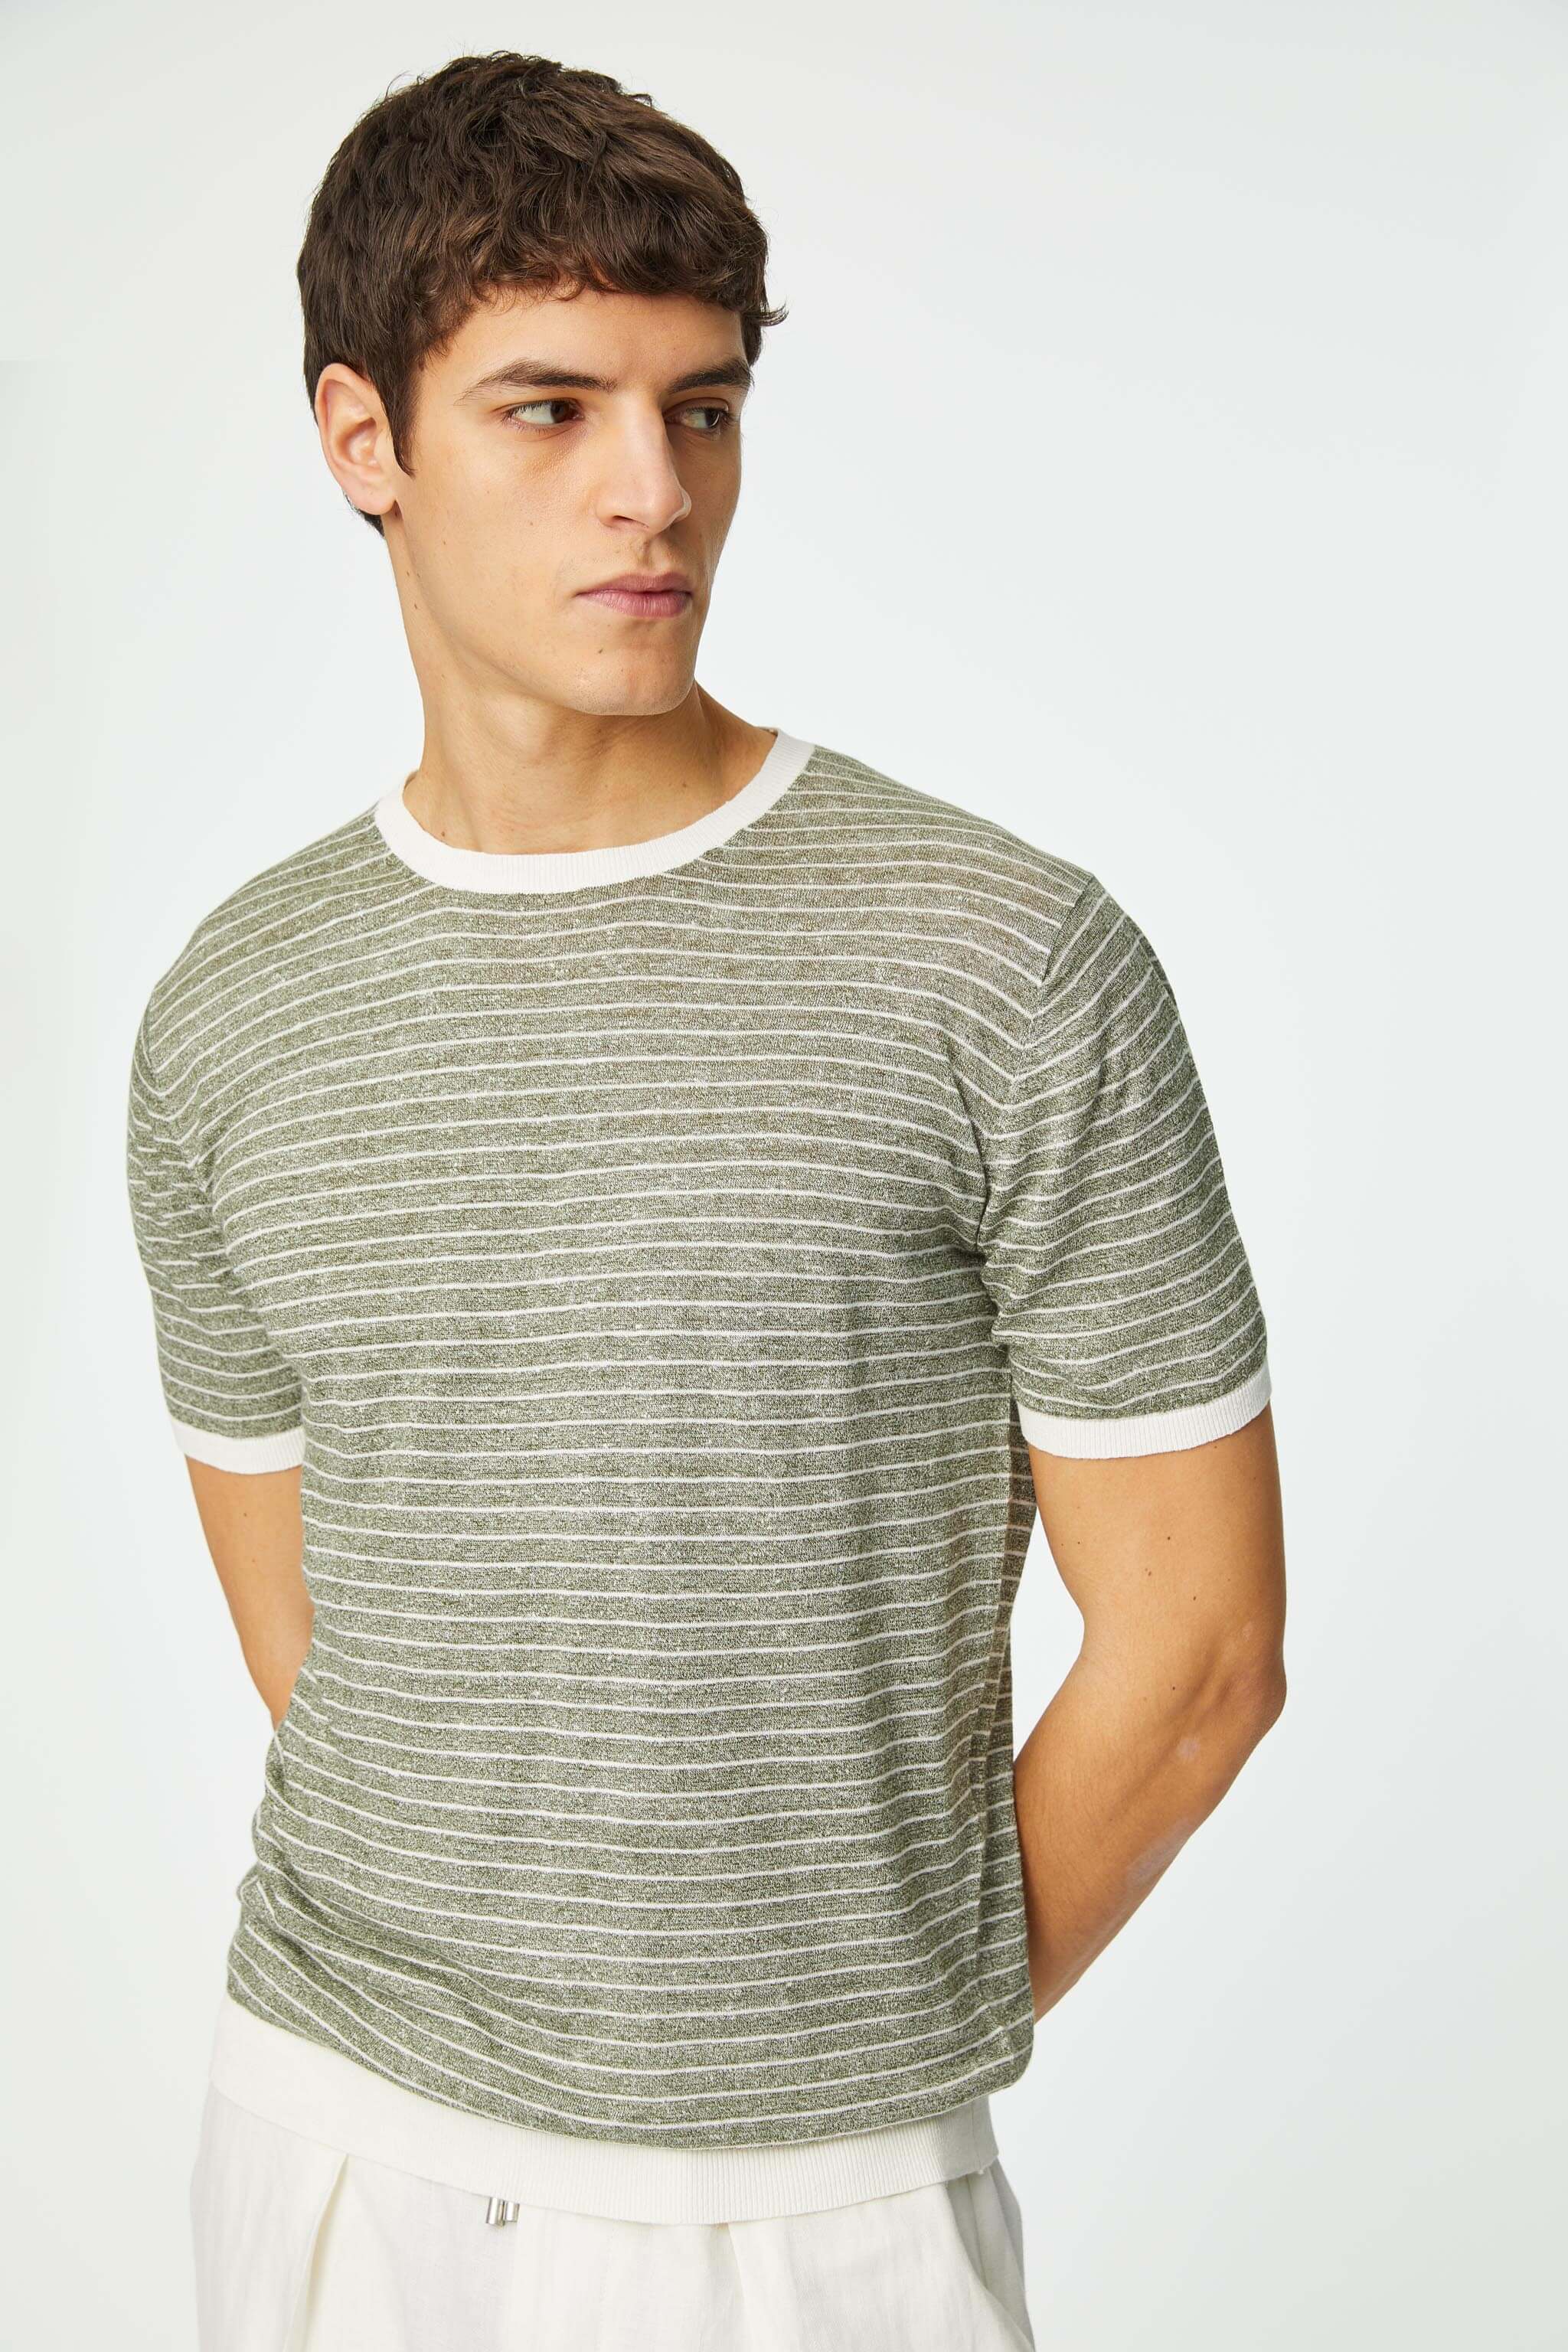 Stripe linen and cotton T-shirt in sage